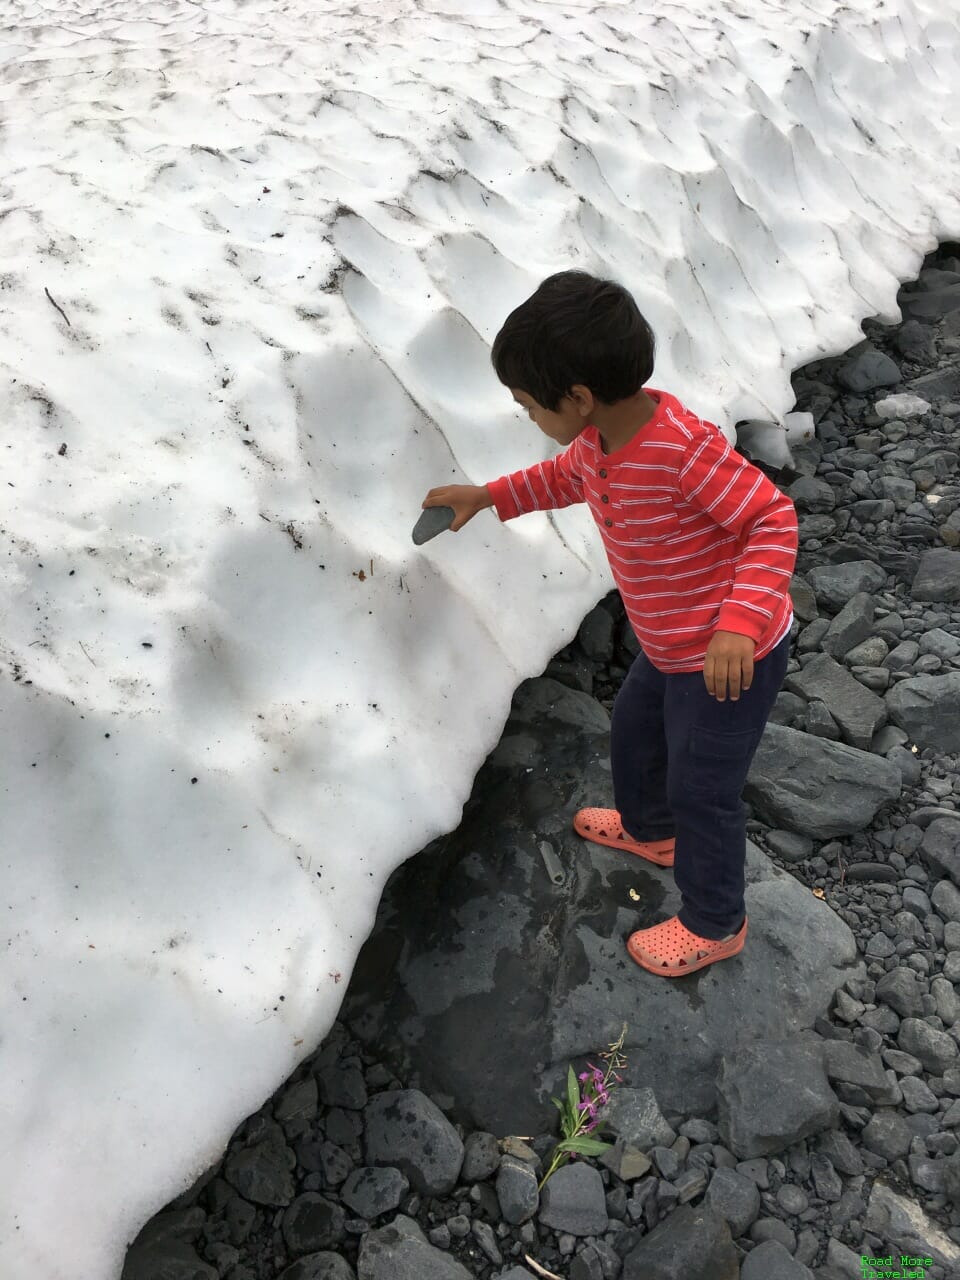 Glacier hopping in Southern Alaska - playing in the snow